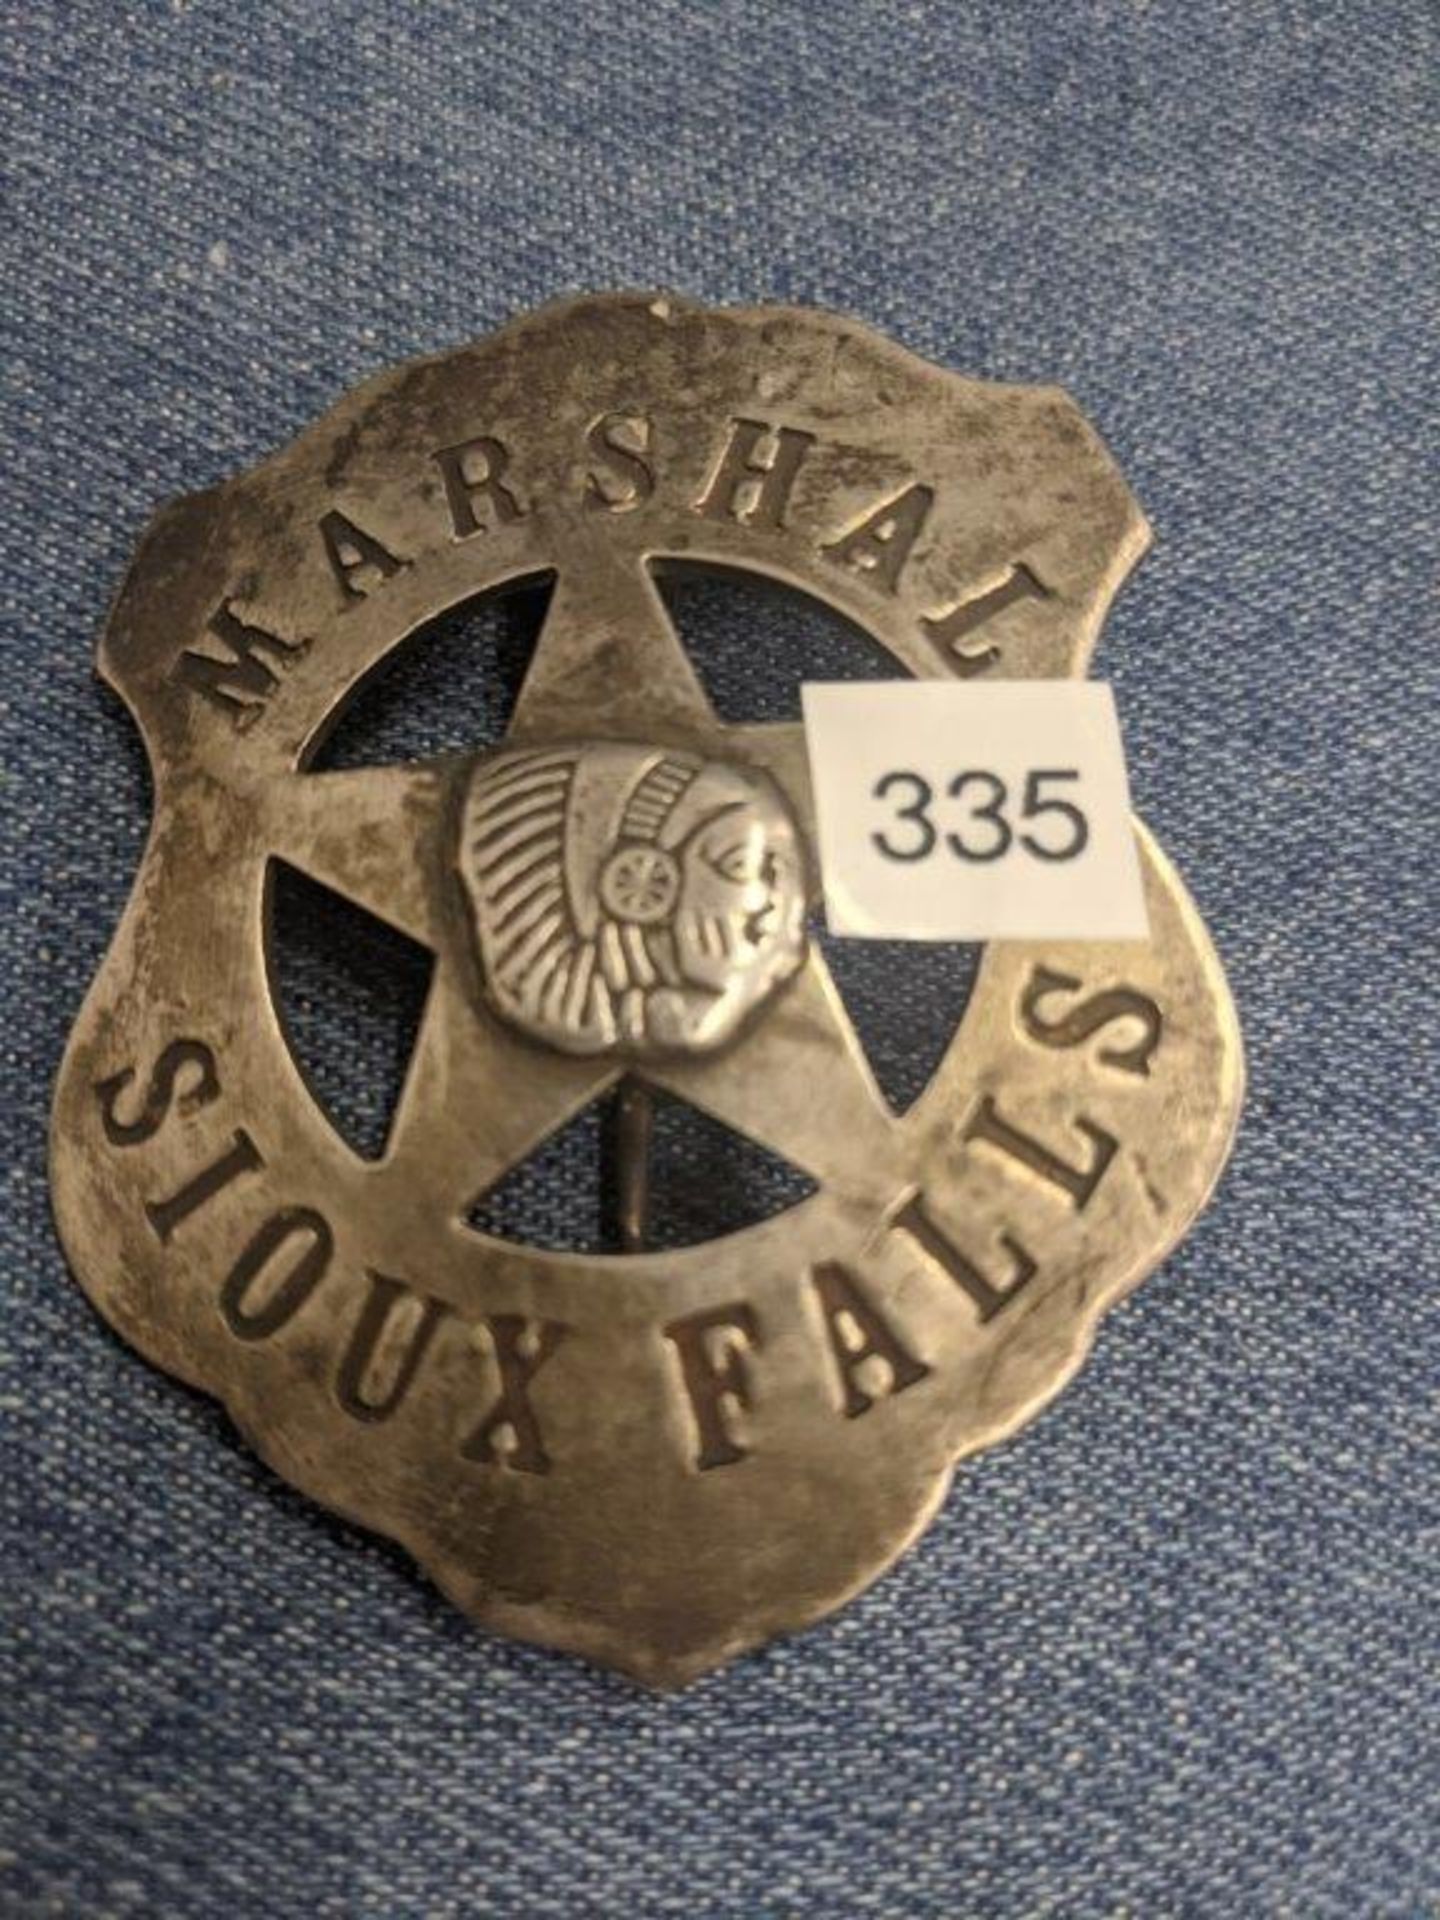 ANTIQUE SILVER MARSHALL BADGE - "SIOUX FALLS"